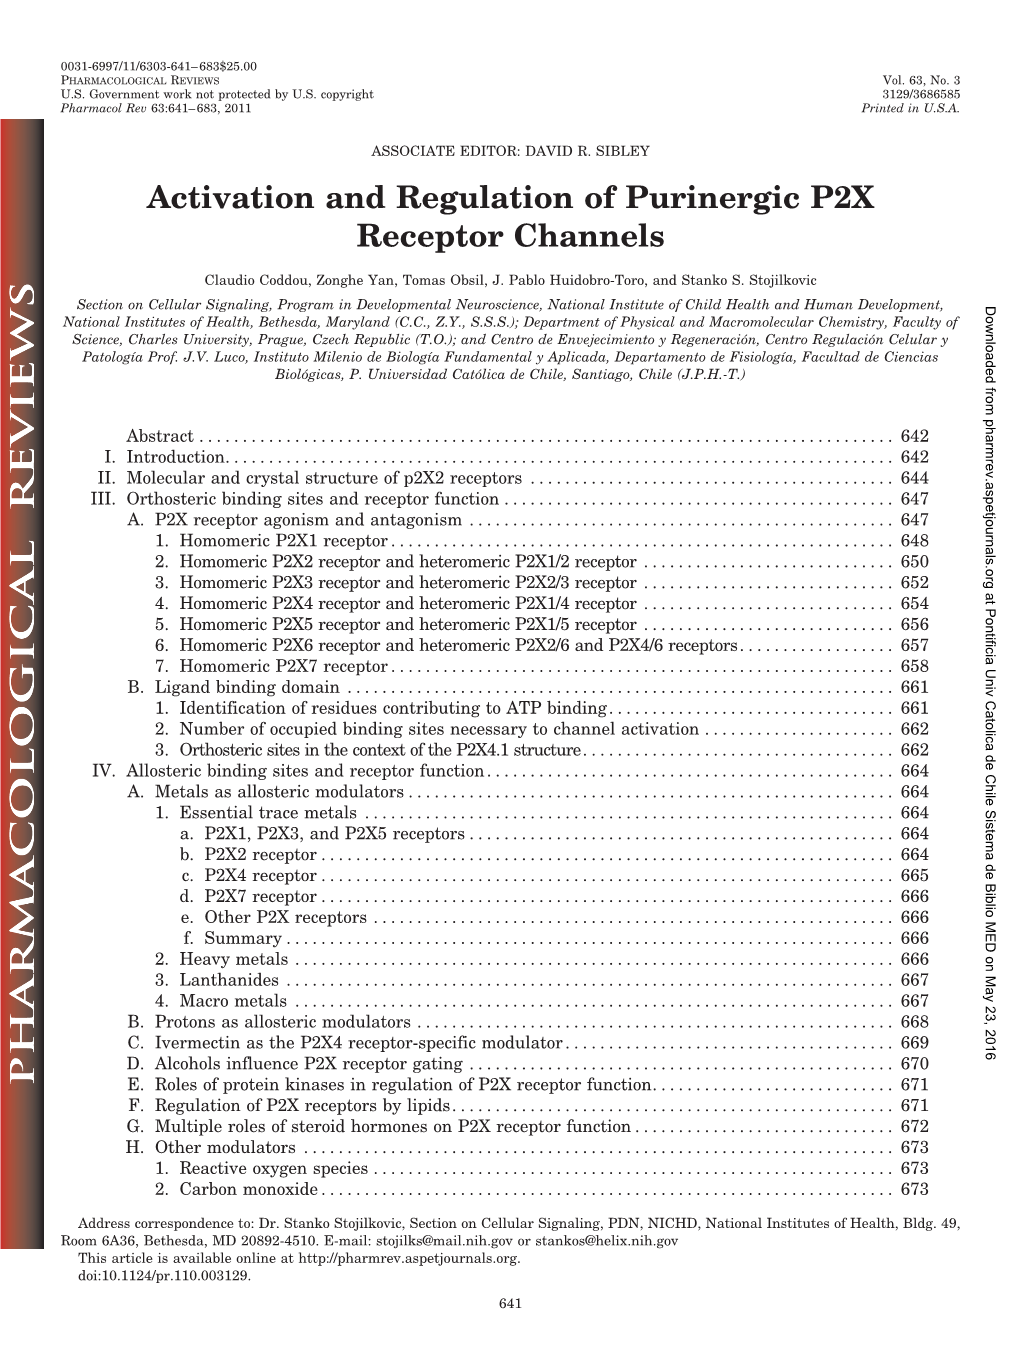 Activation and Regulation of Purinergic P2X Receptor Channels